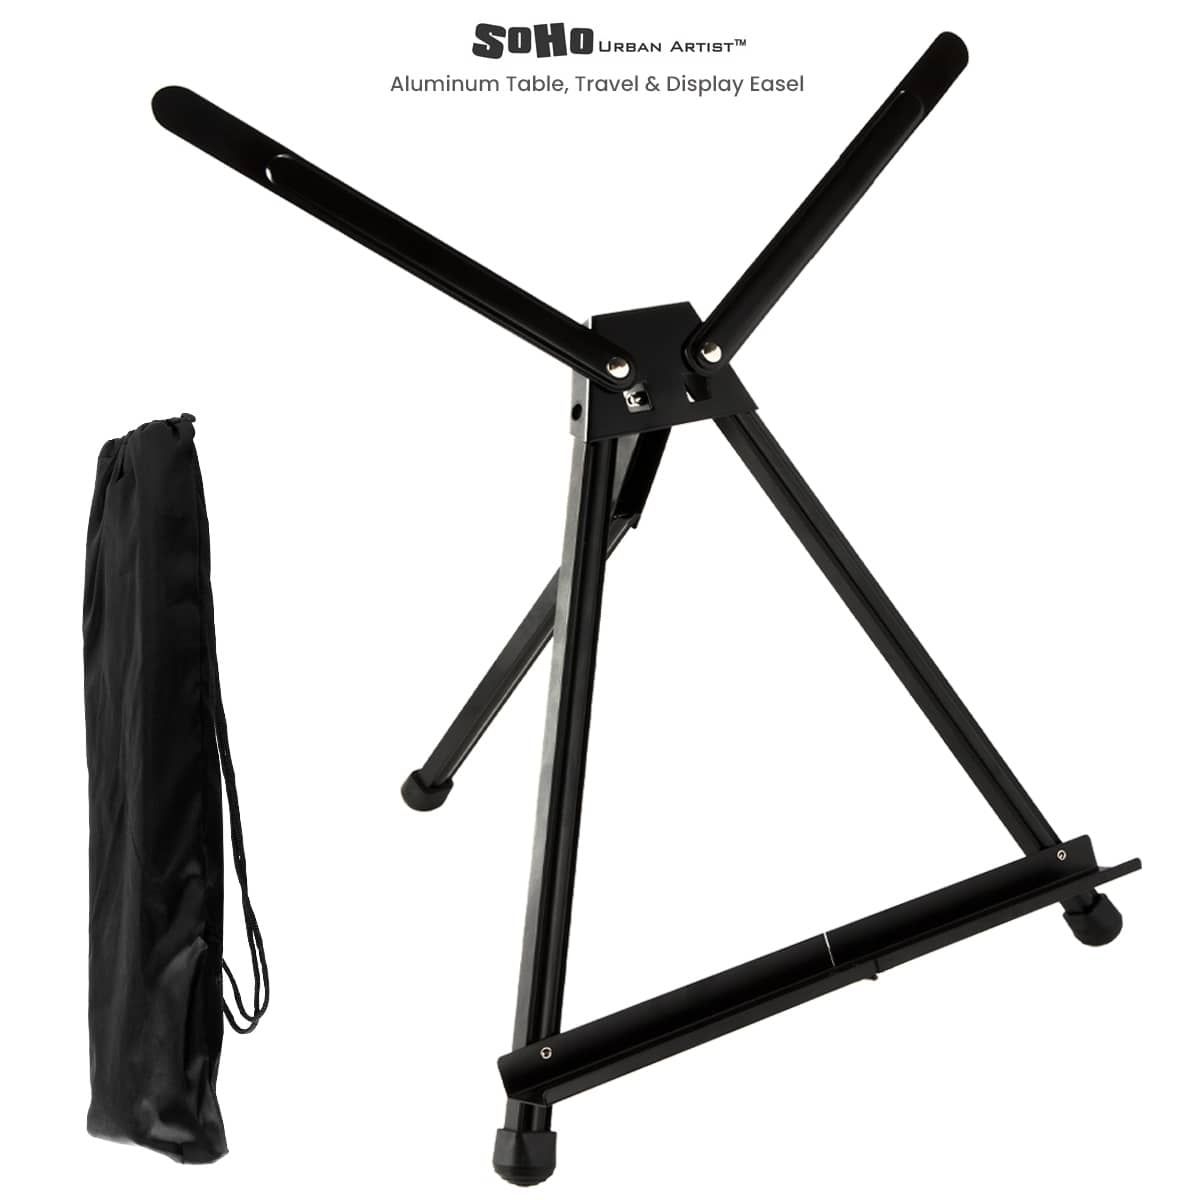 Extra Sturdy for Floor or Table Top Painting 1 Carry Bag T-SIGN Tripod Artist Easel Stand Drawing and Display Adjustable Height from 22 to 73 73'' Art Display Aluminum Black Tall Easel 